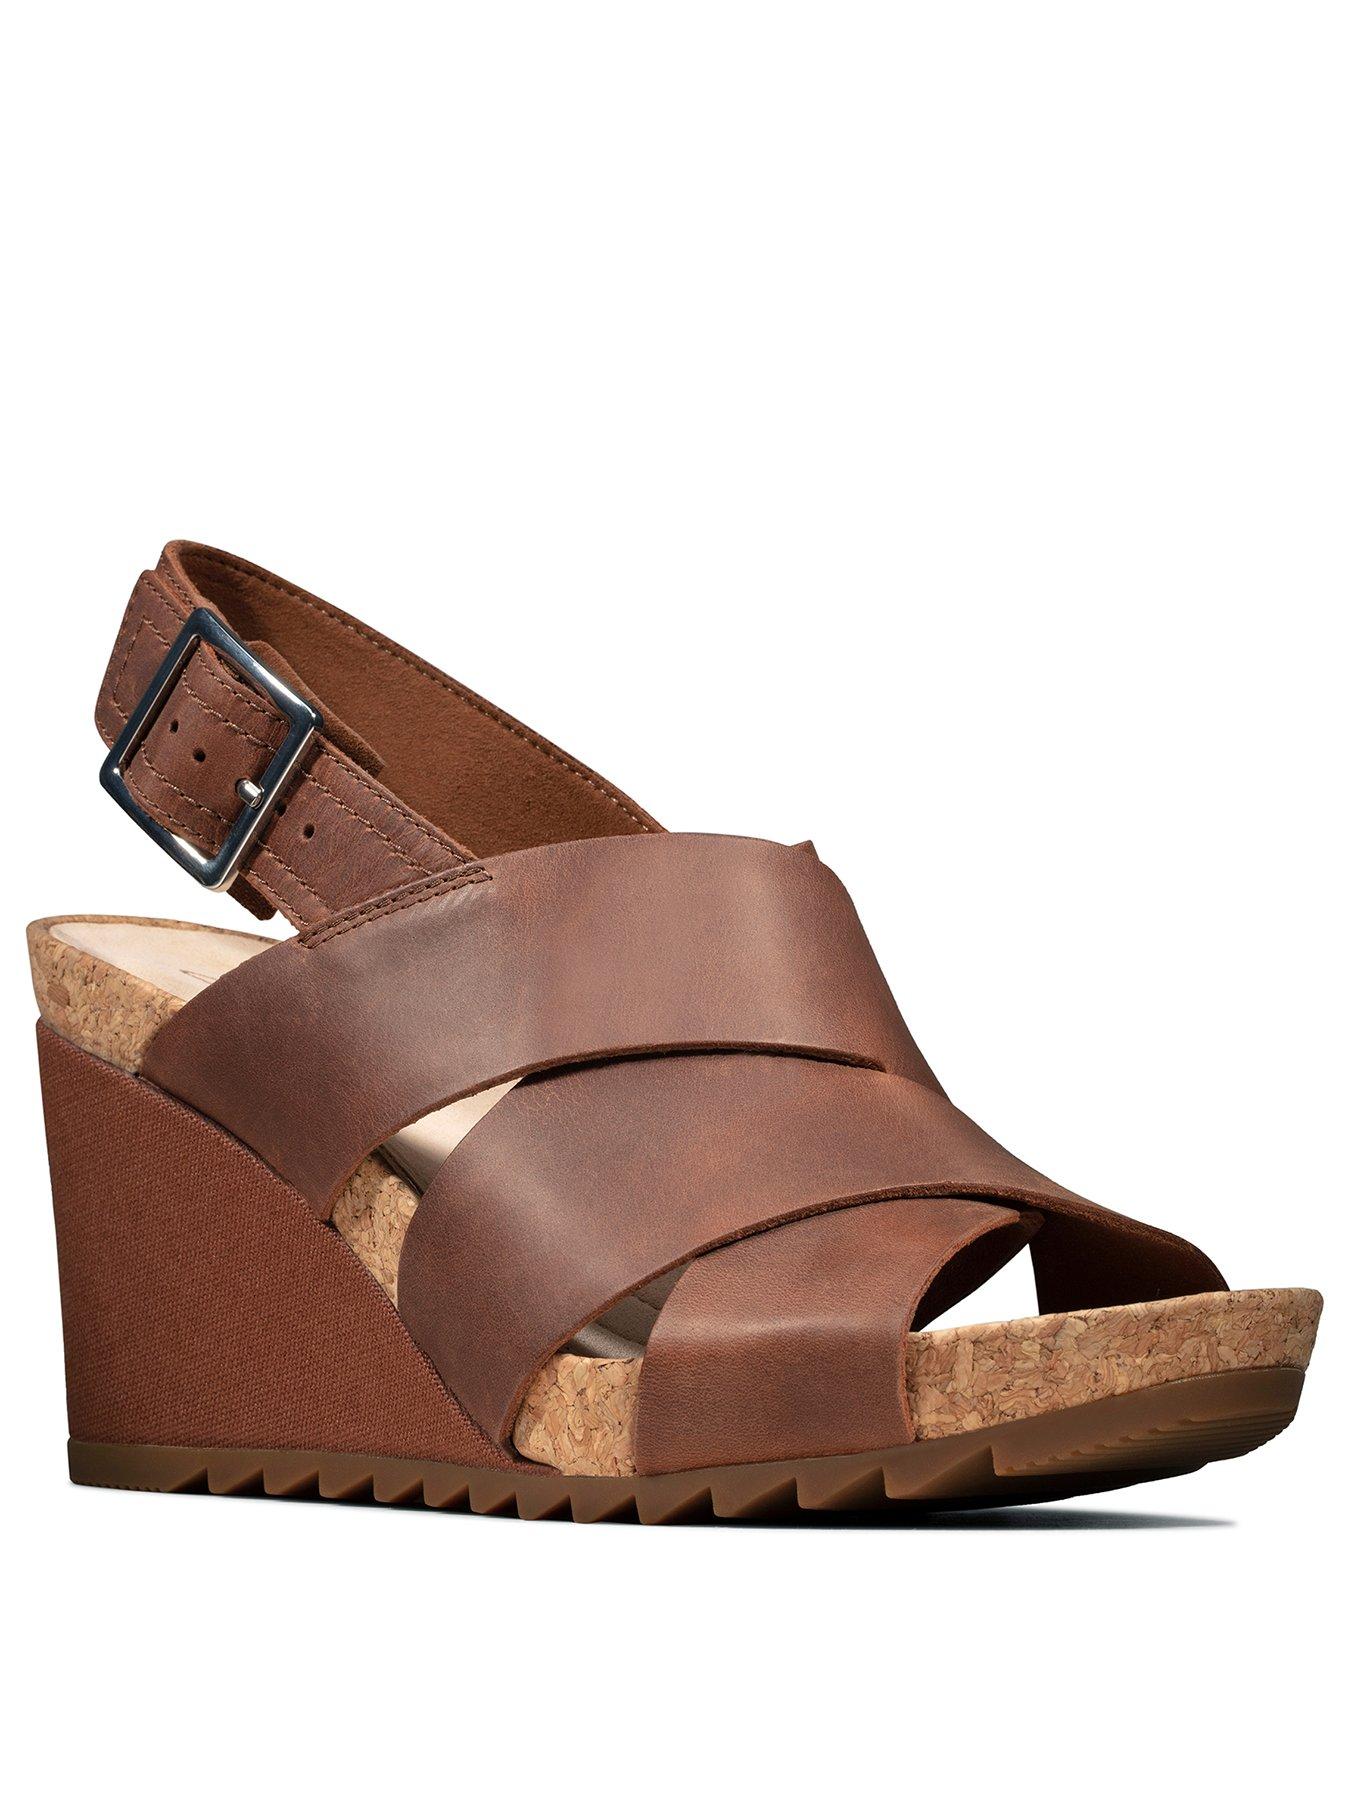 tan leather wedge sandals uk